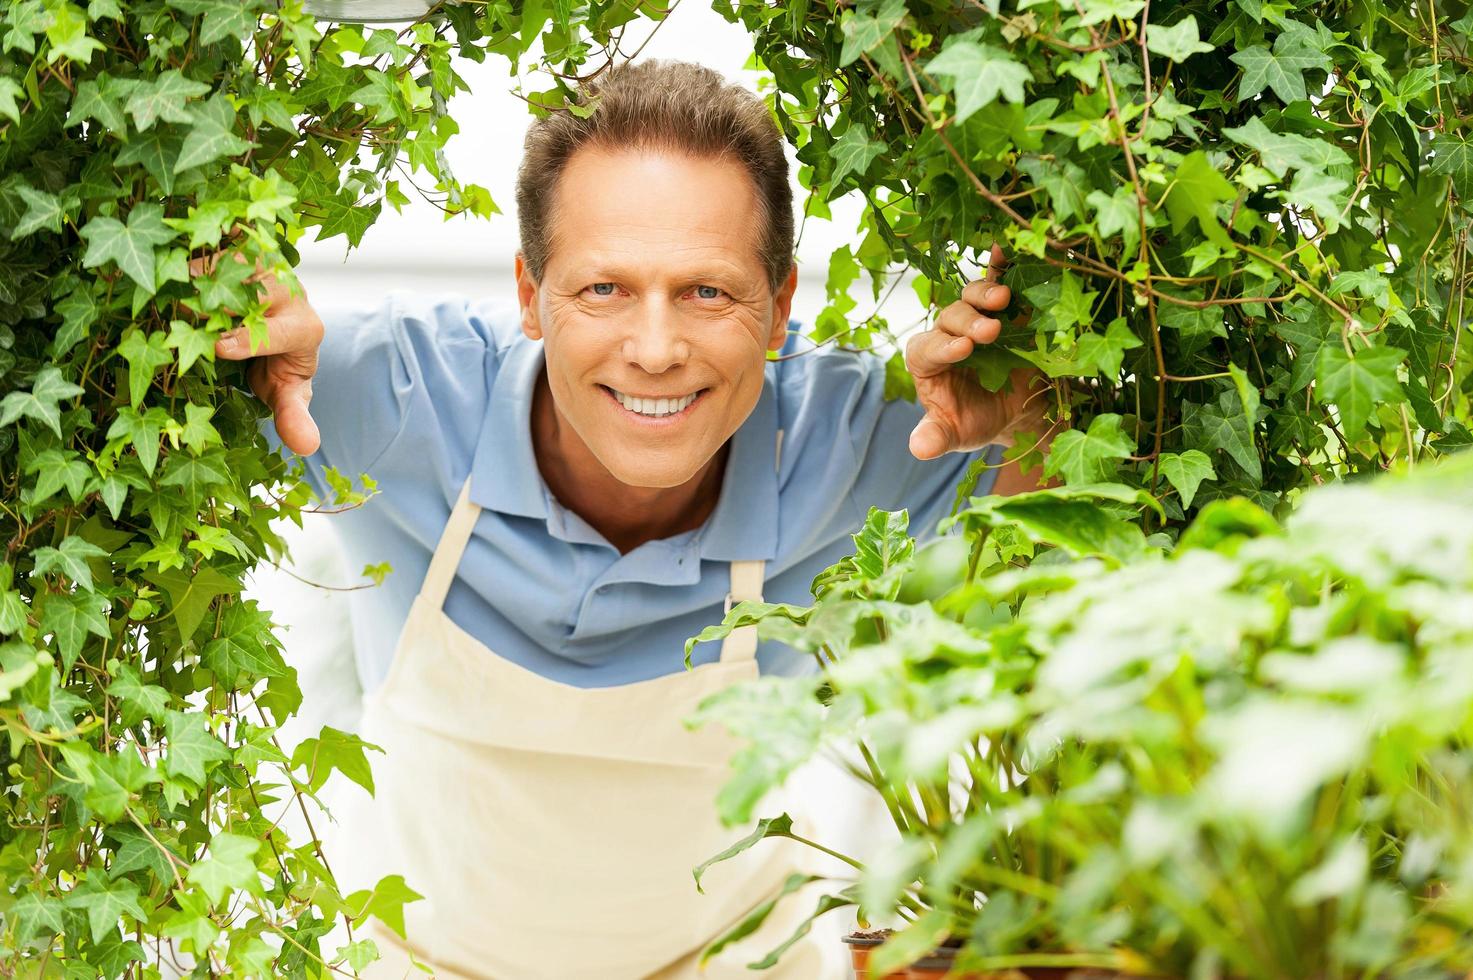 Happy gardener. Handsome mature man looking through plants and smiling photo